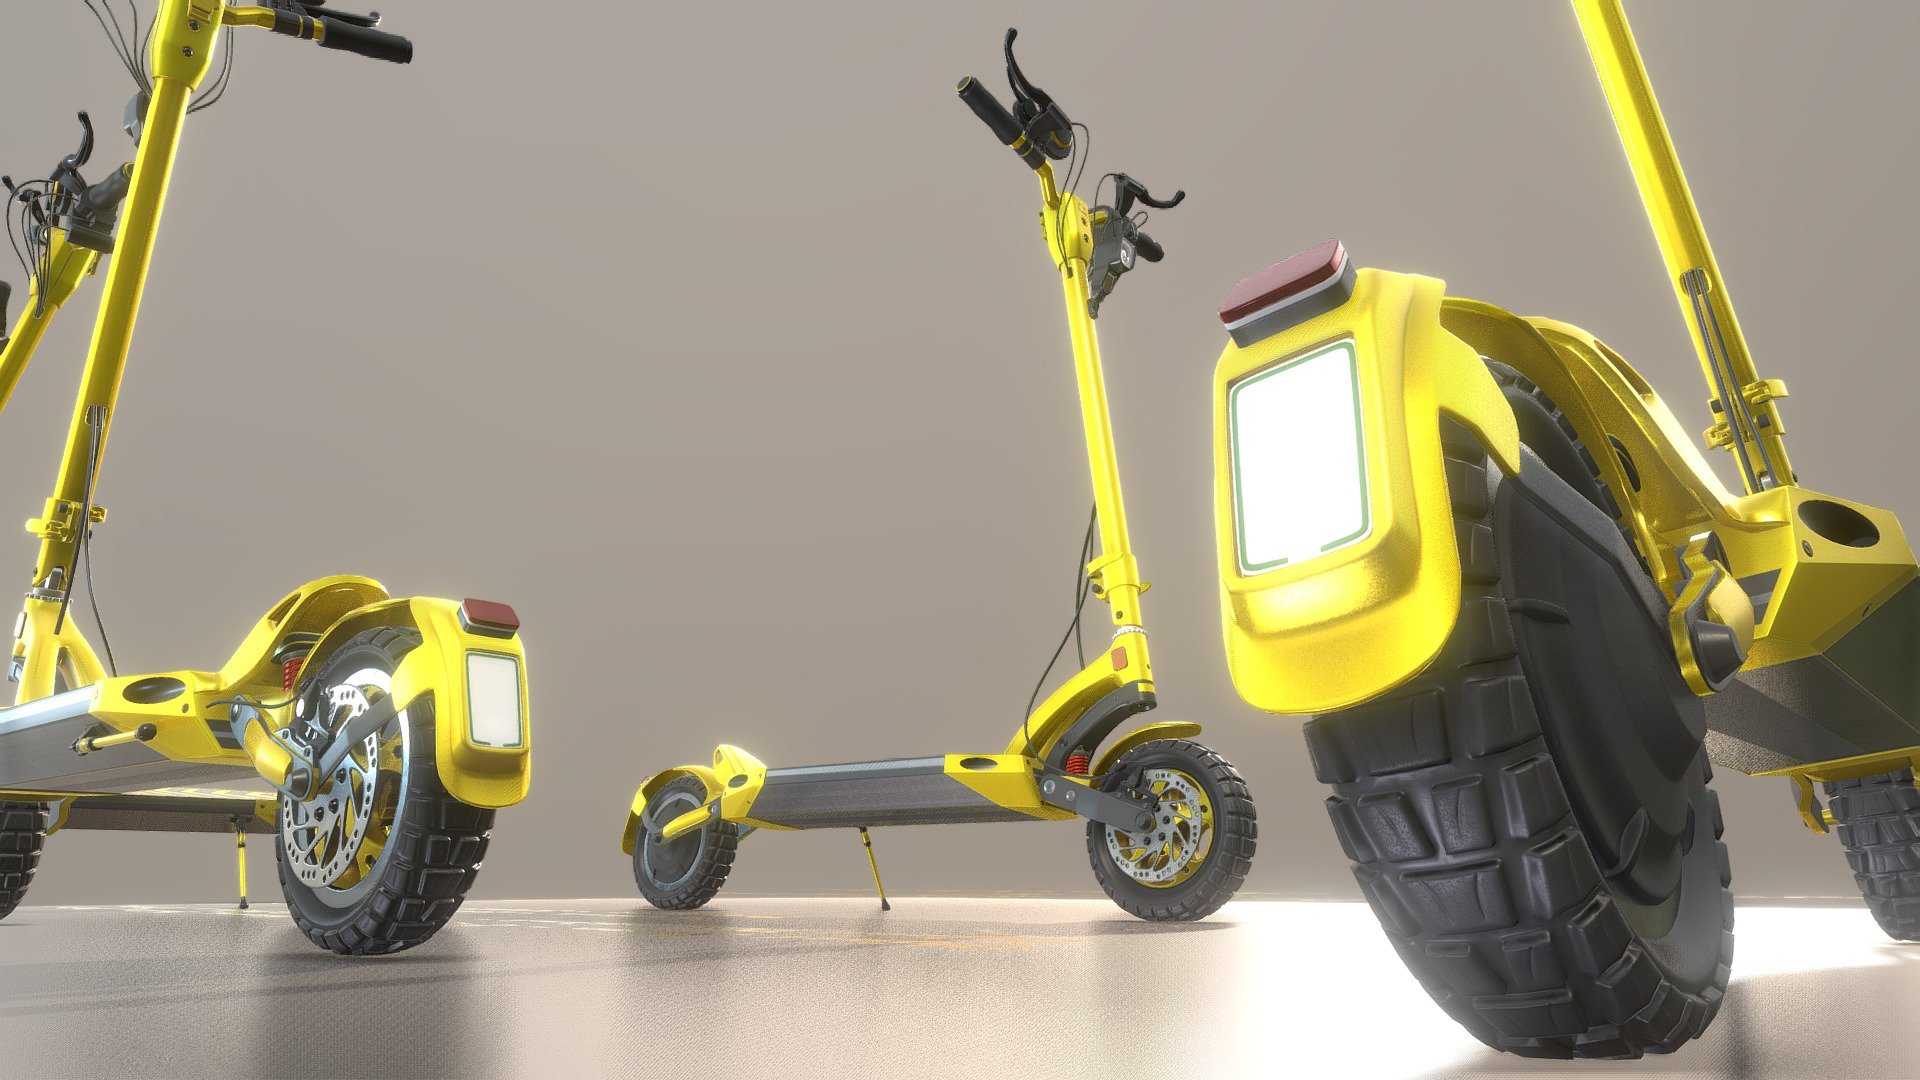 Here is the hornet version for the offroad e-scooter.





Object Name - E-Scooter_Hornet_Yellow_Drive 

Object Dimensions -  1.317m x 0.593m x 1.370m






Object Name - E-Scooter_Hornet_Yellow_Stand 

Object Dimensions -  1.317m x 0.586m x 1.399m






Vertices = 26797

Edges = 59976

Polygons = 33089



Materials

E-Scoote_Yellow Hornet:




Blend Mode: OPAQUE

Shadow Mode: OPAQUE

E-Scooter_Yellow_Nor_8K.jpg(8192x8192px)

E-Scooter_Yellow_Col_8K.jpg(8192x8192px)

E-Scooter_Yellow_Met_8K.jpg(8192x8192px)

E-Scooter_Yellow_Ro_8K.jpg(8192x8192px)

Glass_E-Scoote_Yellow Hornet:




Blend Mode: BLEND

Shadow Mode: OPAQUE

E-Scooter_Yellow_Nor_8K.jpg(8192x8192px)

E-Scooter_Yellow_Ro_8K.jpg(8192x8192px)

E-Scooter_Yellow_Met_8K.jpg(8192x8192px)

E-Scooter_Yellow_Col_8K.jpg(8192x8192px)



Location:

x: 0

y: 0

z: 0

Rotation:

x: 0°

y: 0°

z: 0°

Scale:

x: 1.0

y: 1.0

z: 1.0






Last update:
15:10:24  04.04.23
 - Offroad E-Scooter Hornet - Buy Royalty Free 3D model by VIS-All-3D (@VIS-All) 3d model